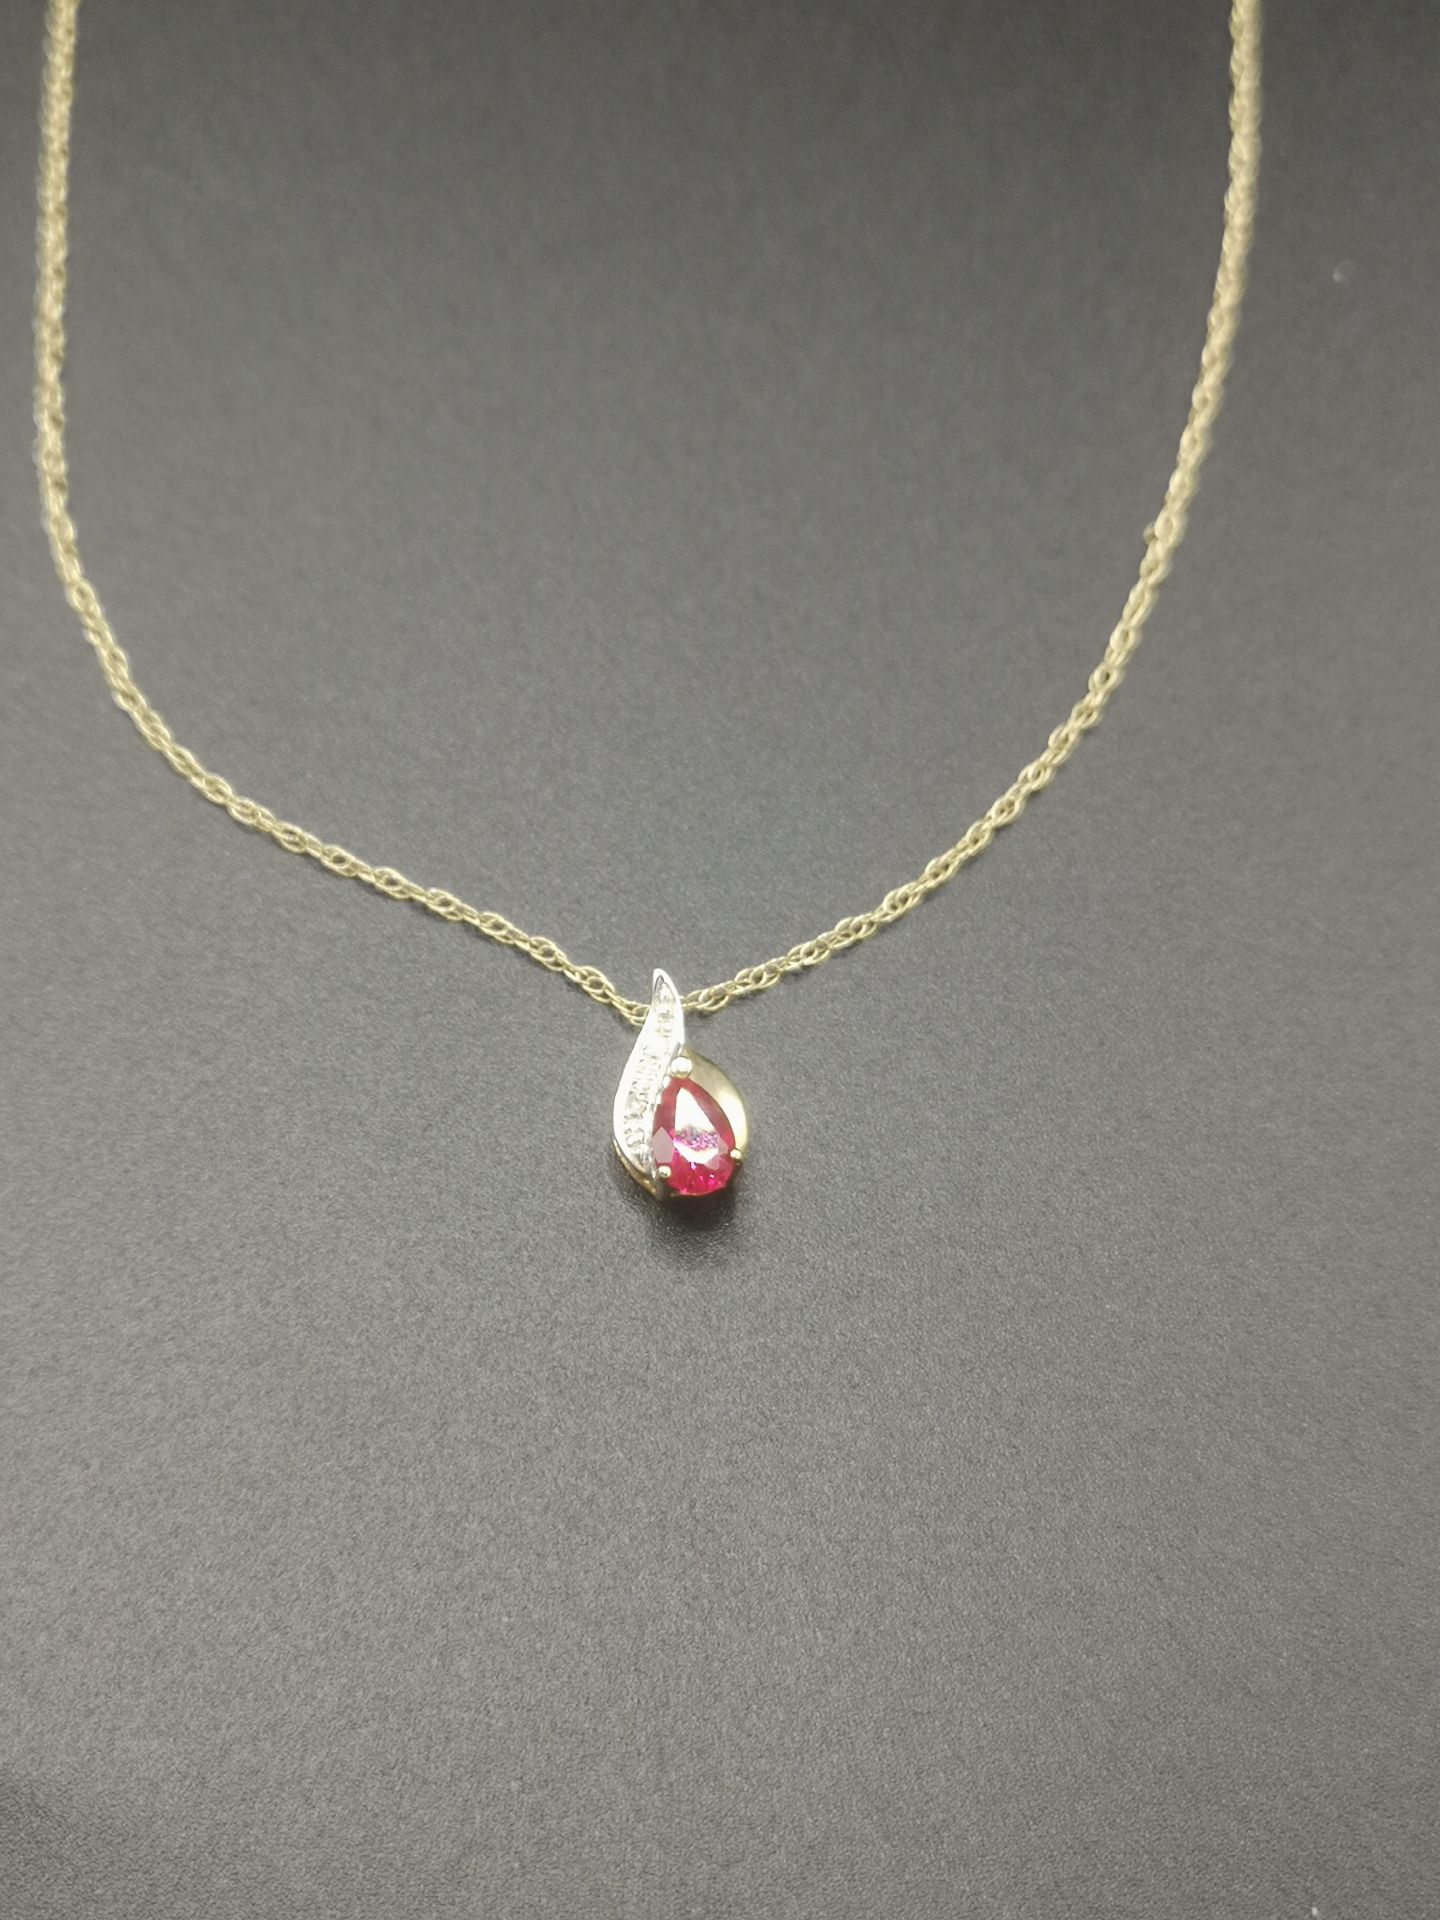 9ct gold necklace with ruby and diamond pendant - Image 2 of 5